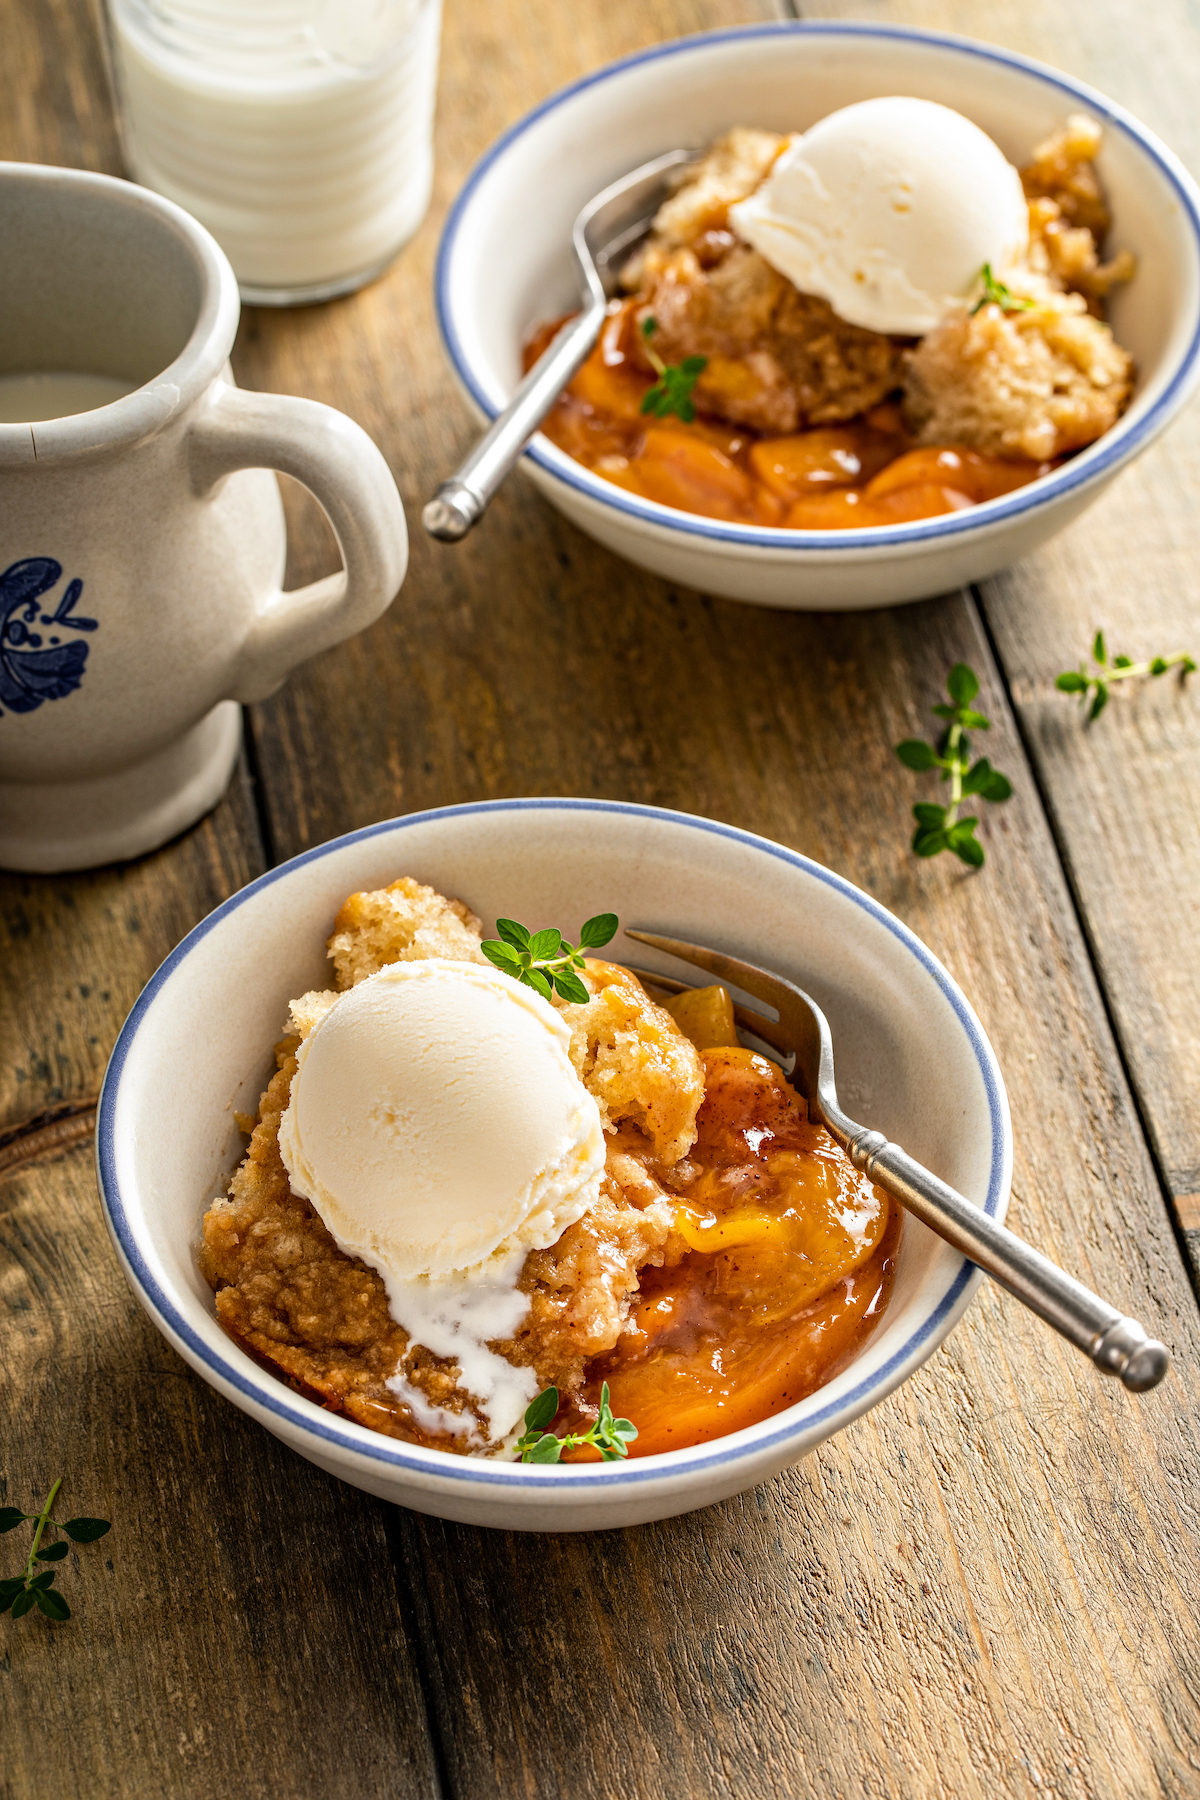 Two bowls of crockpot peach cobbler servings topped with vanilla ice cream, on a wooden tabletop.